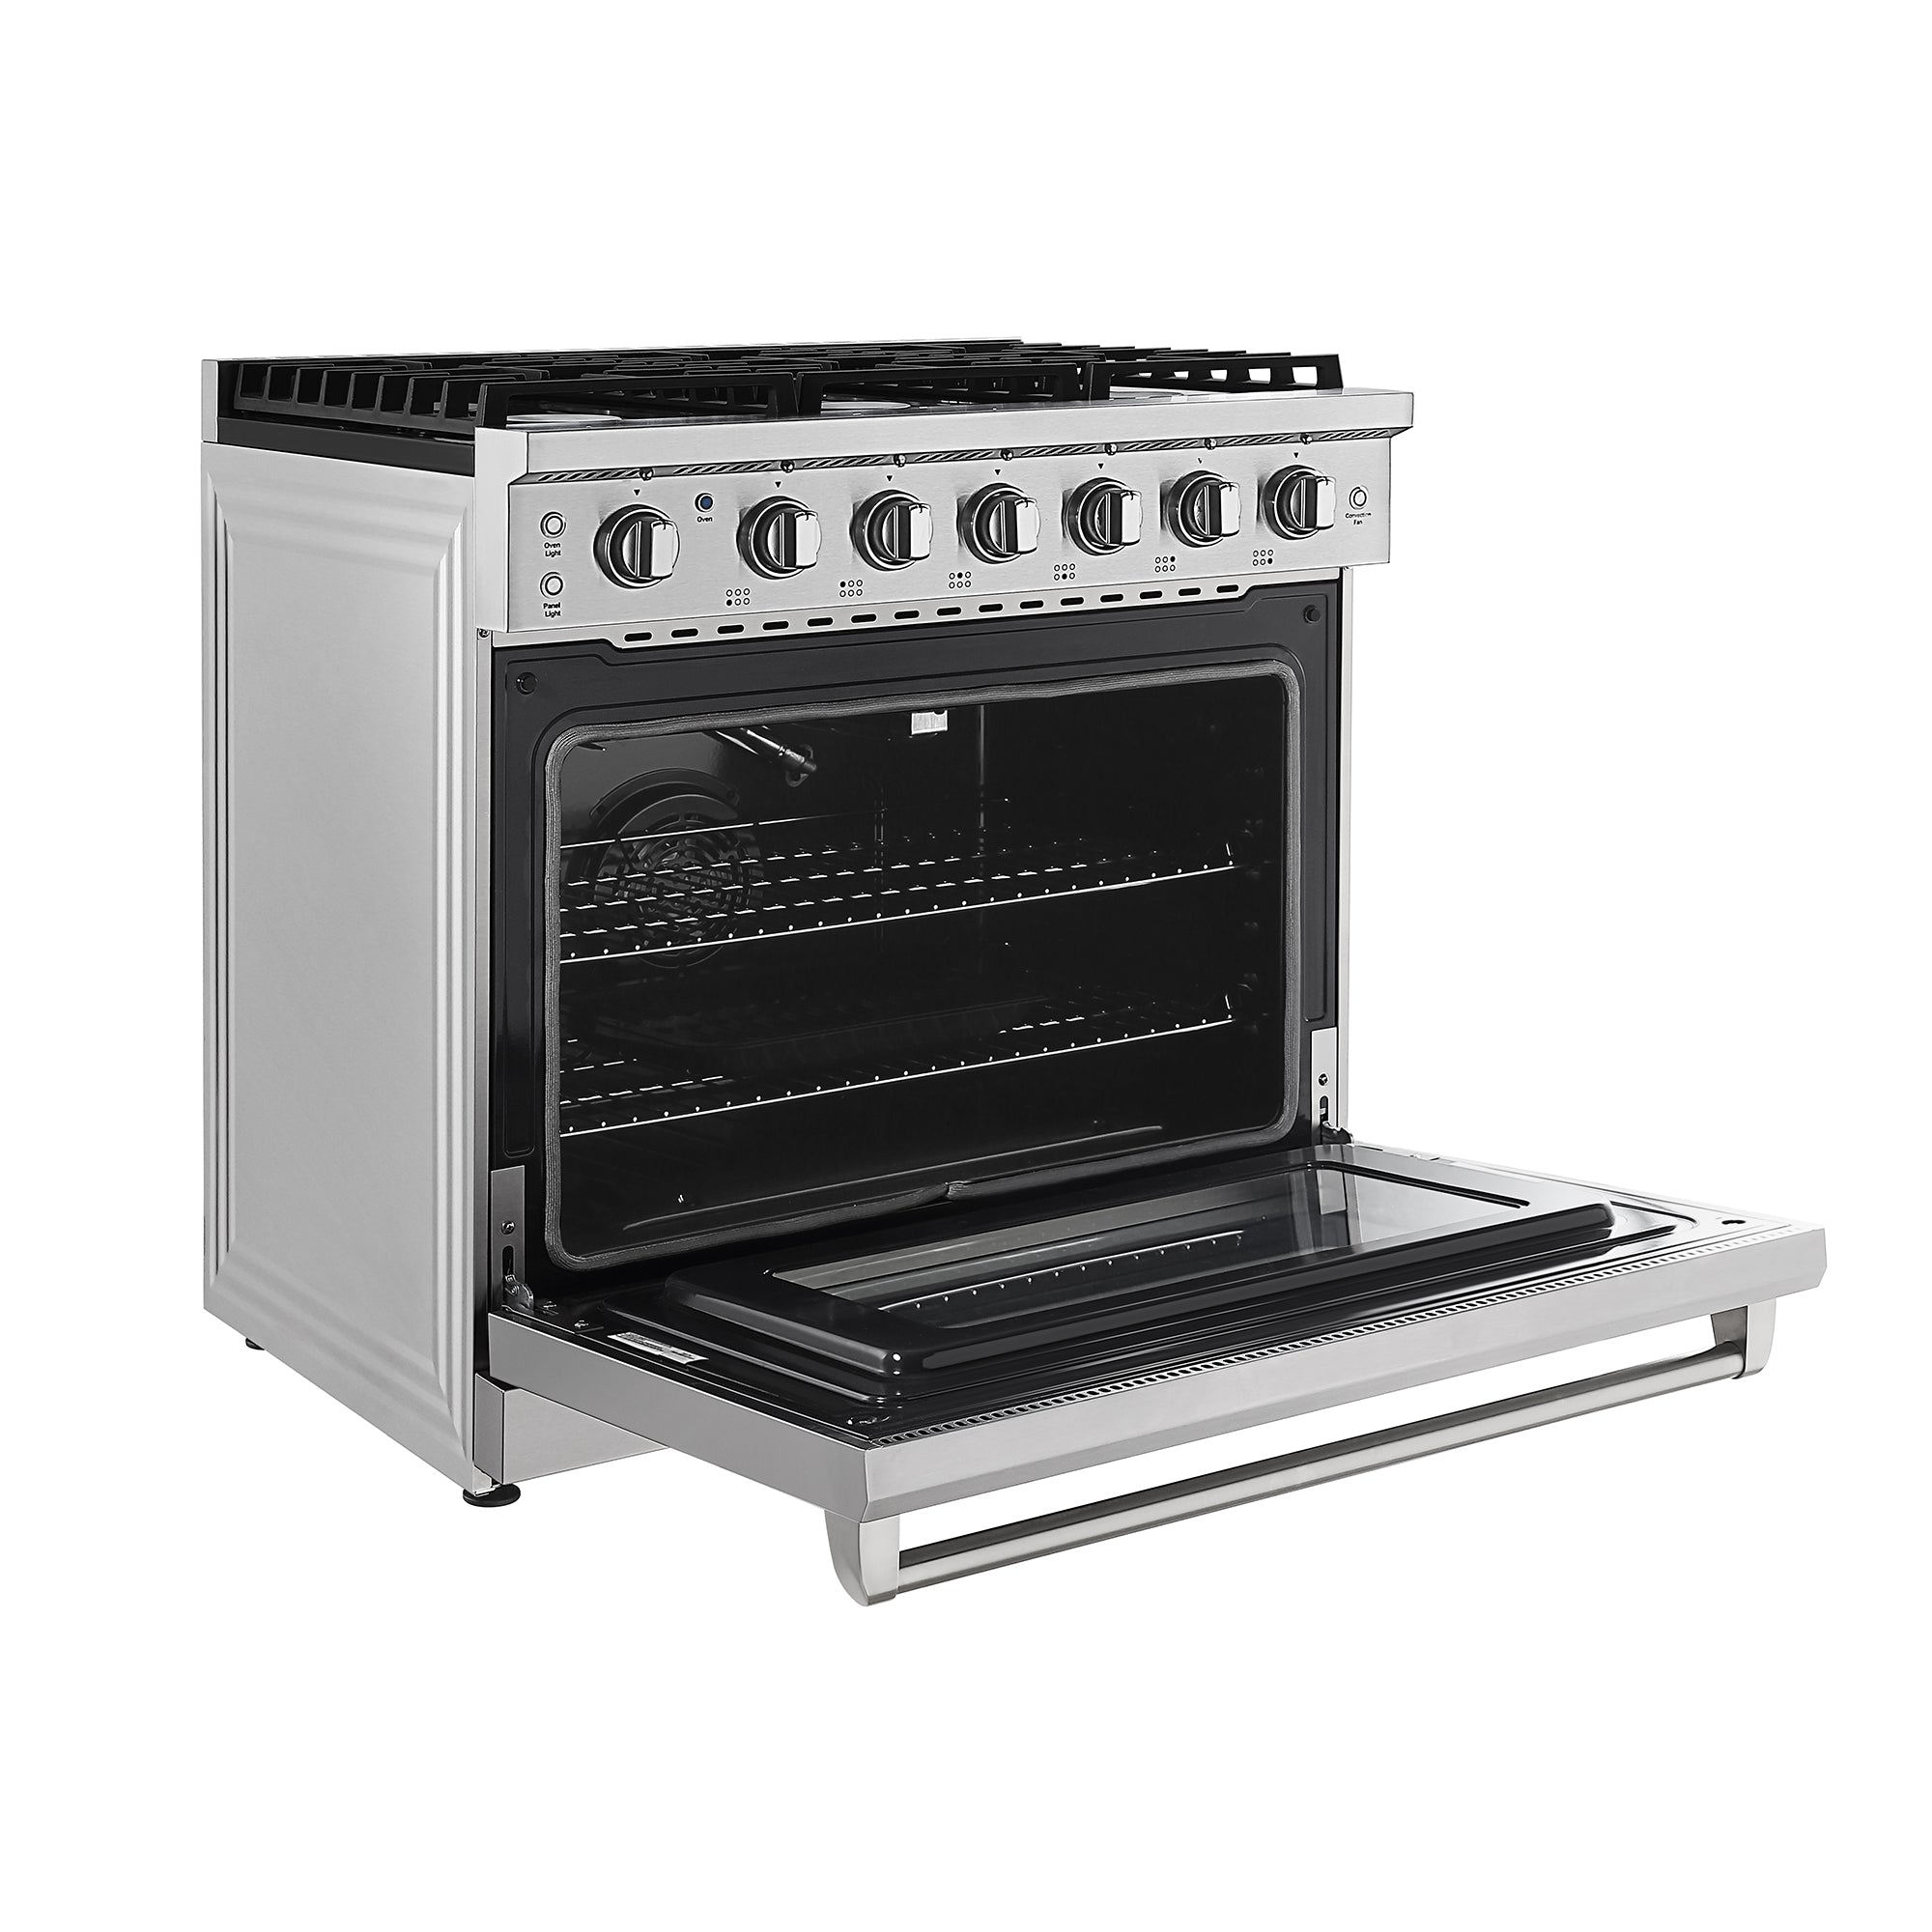 Empava 36 in. Pro-Style Freestanding Gas on Gas Range in Stainless Steel (36GR11)